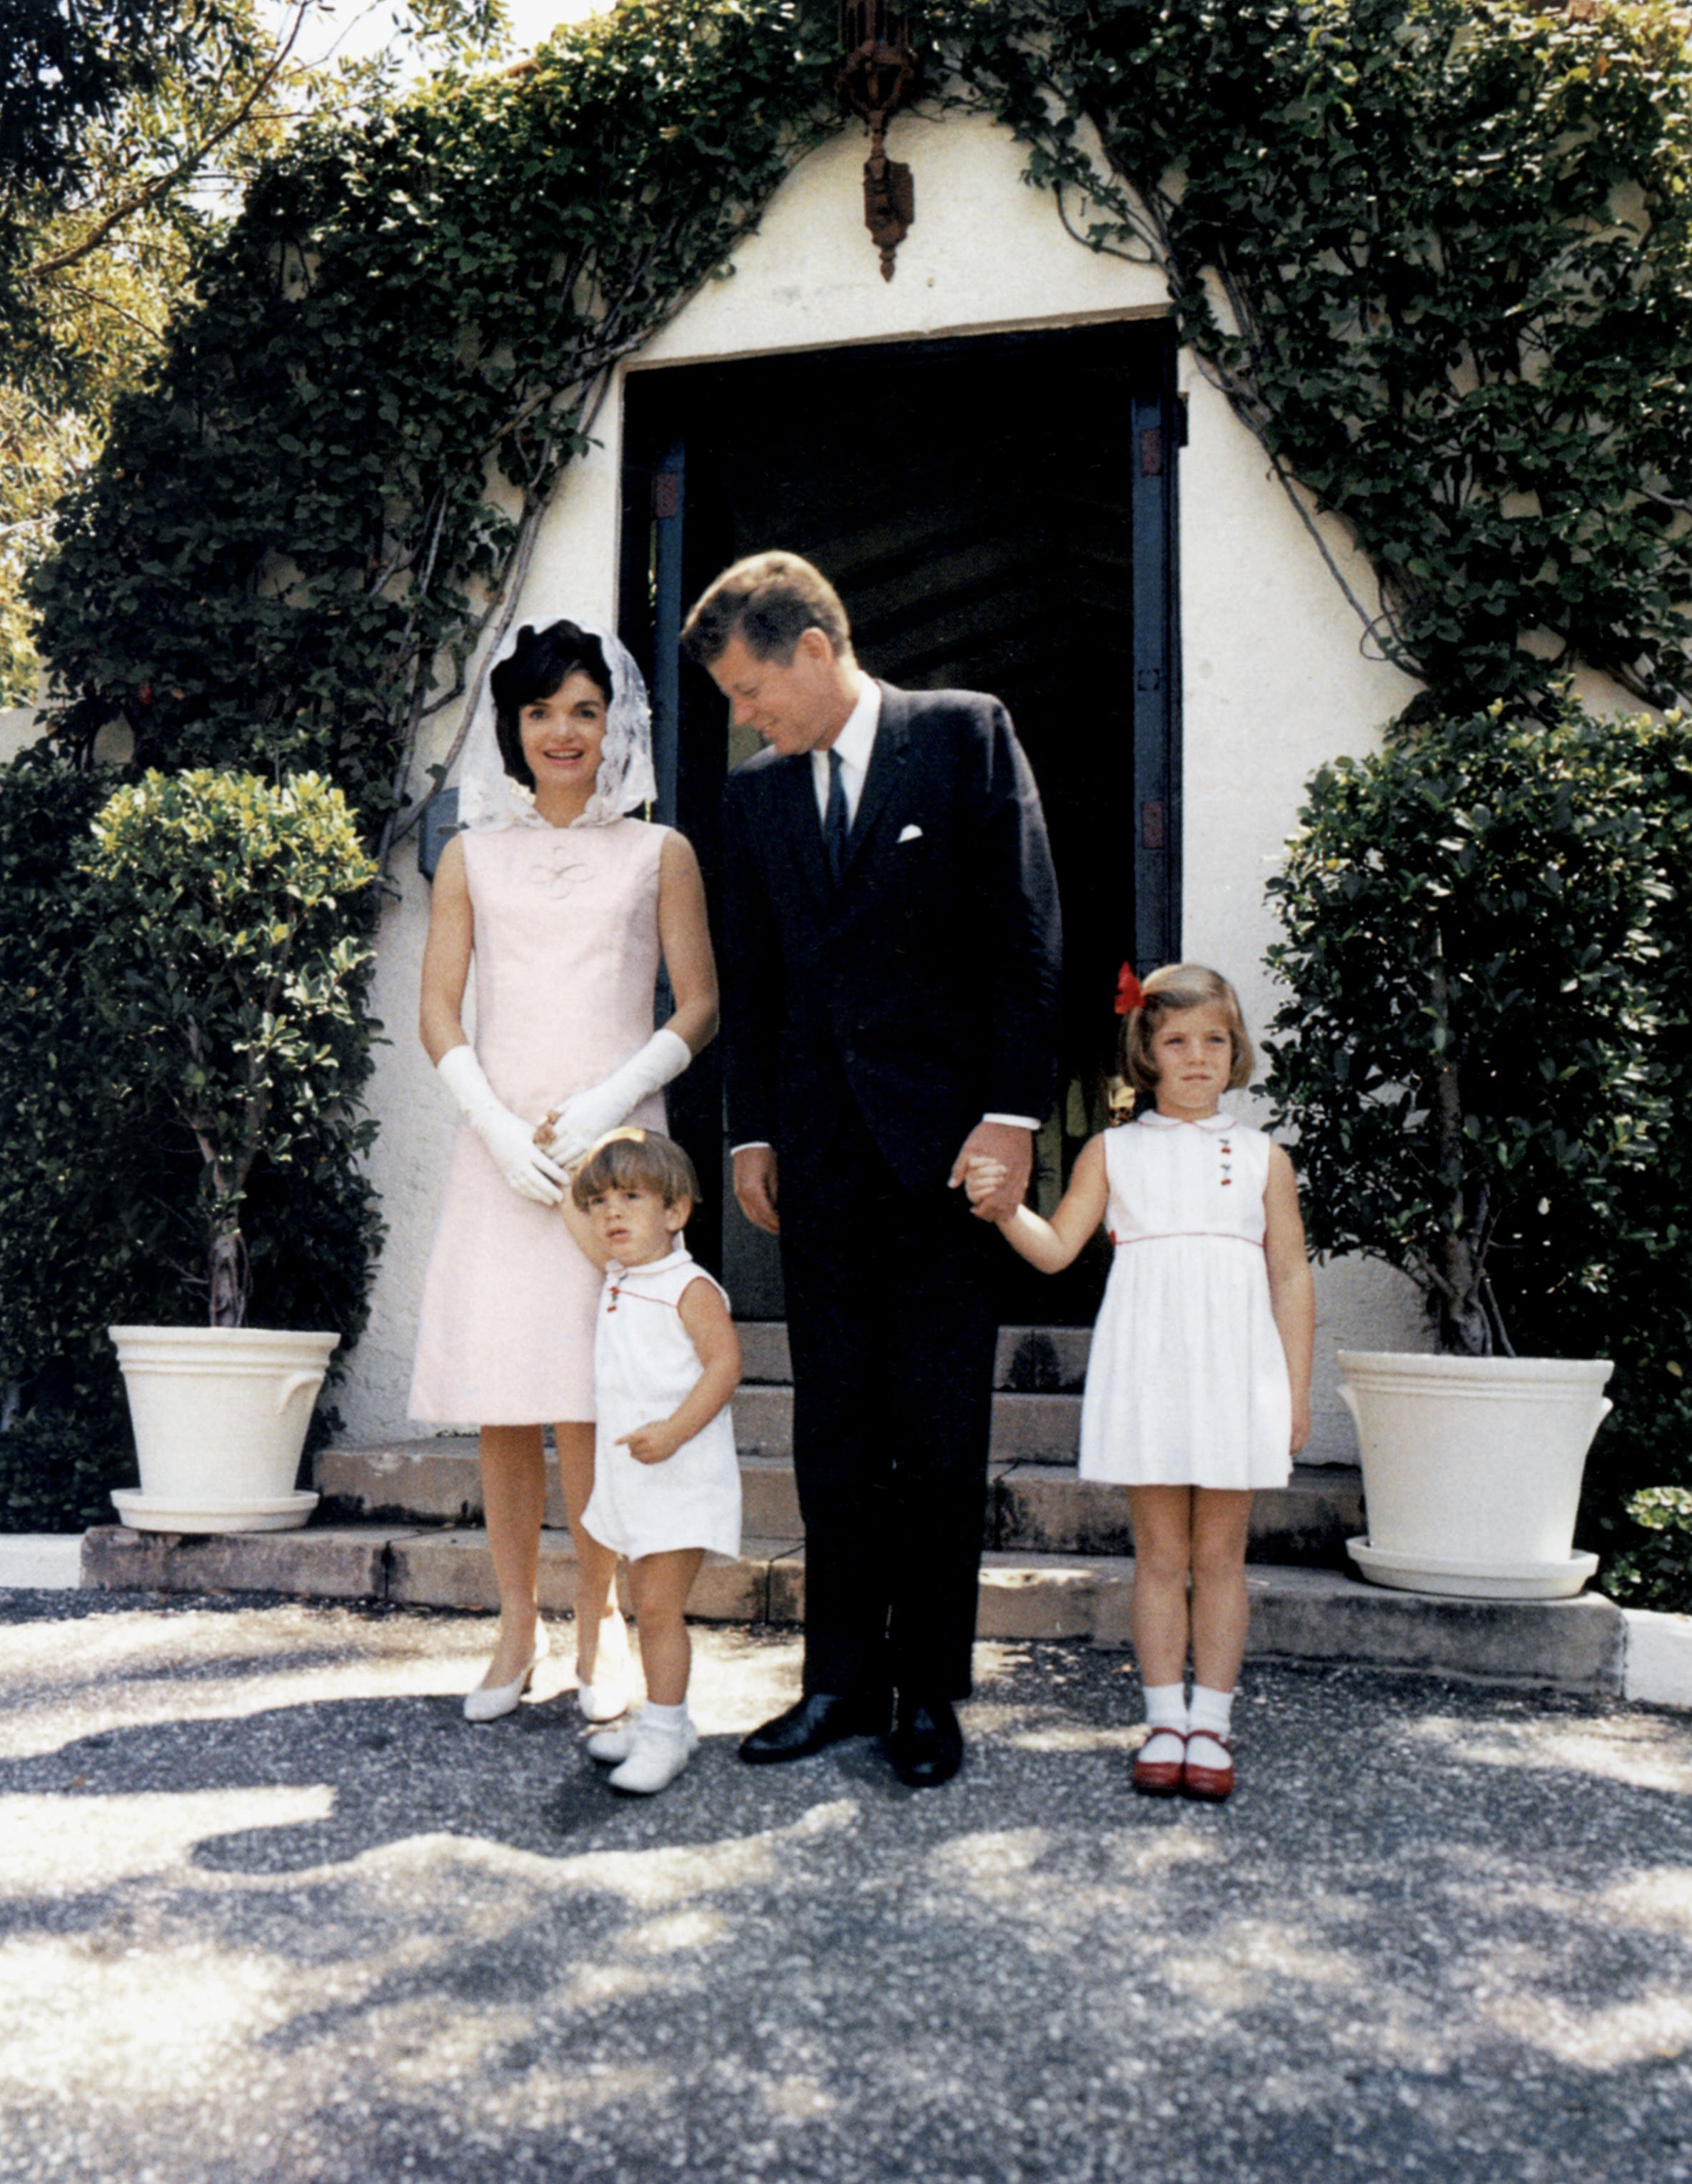 Jacqueline Kennedy with President John F. Kennedy and their two children John Jr and Caroline at Palm Beach, Florida on April 14, 1963 | Photo: Getty Images